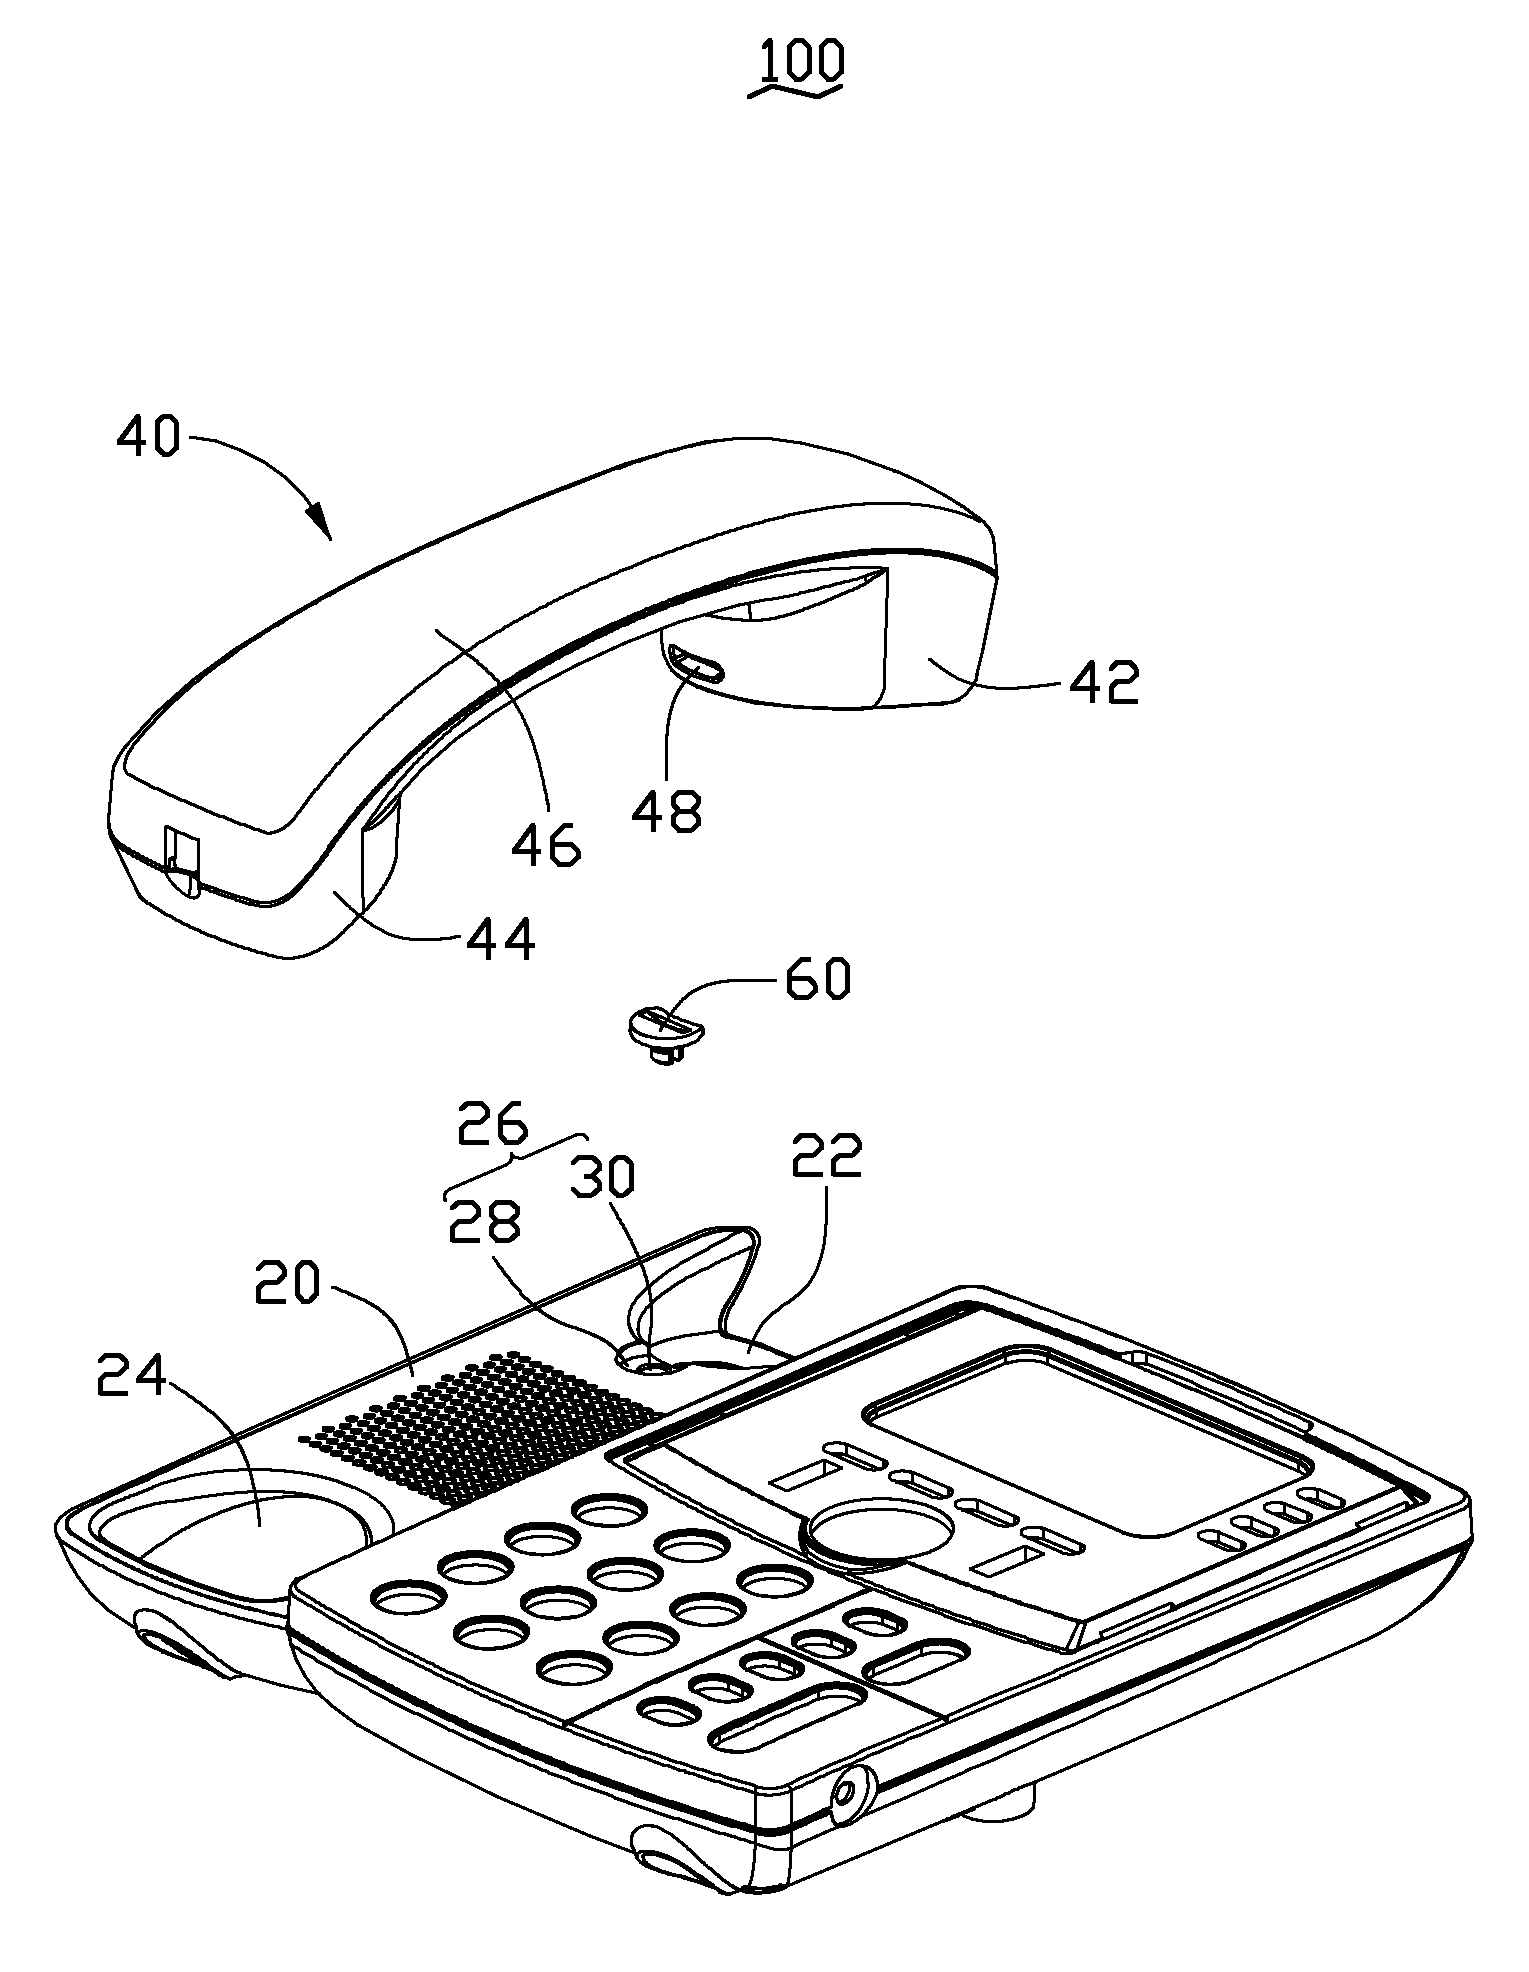 Telephone having rotatable hook to support handset